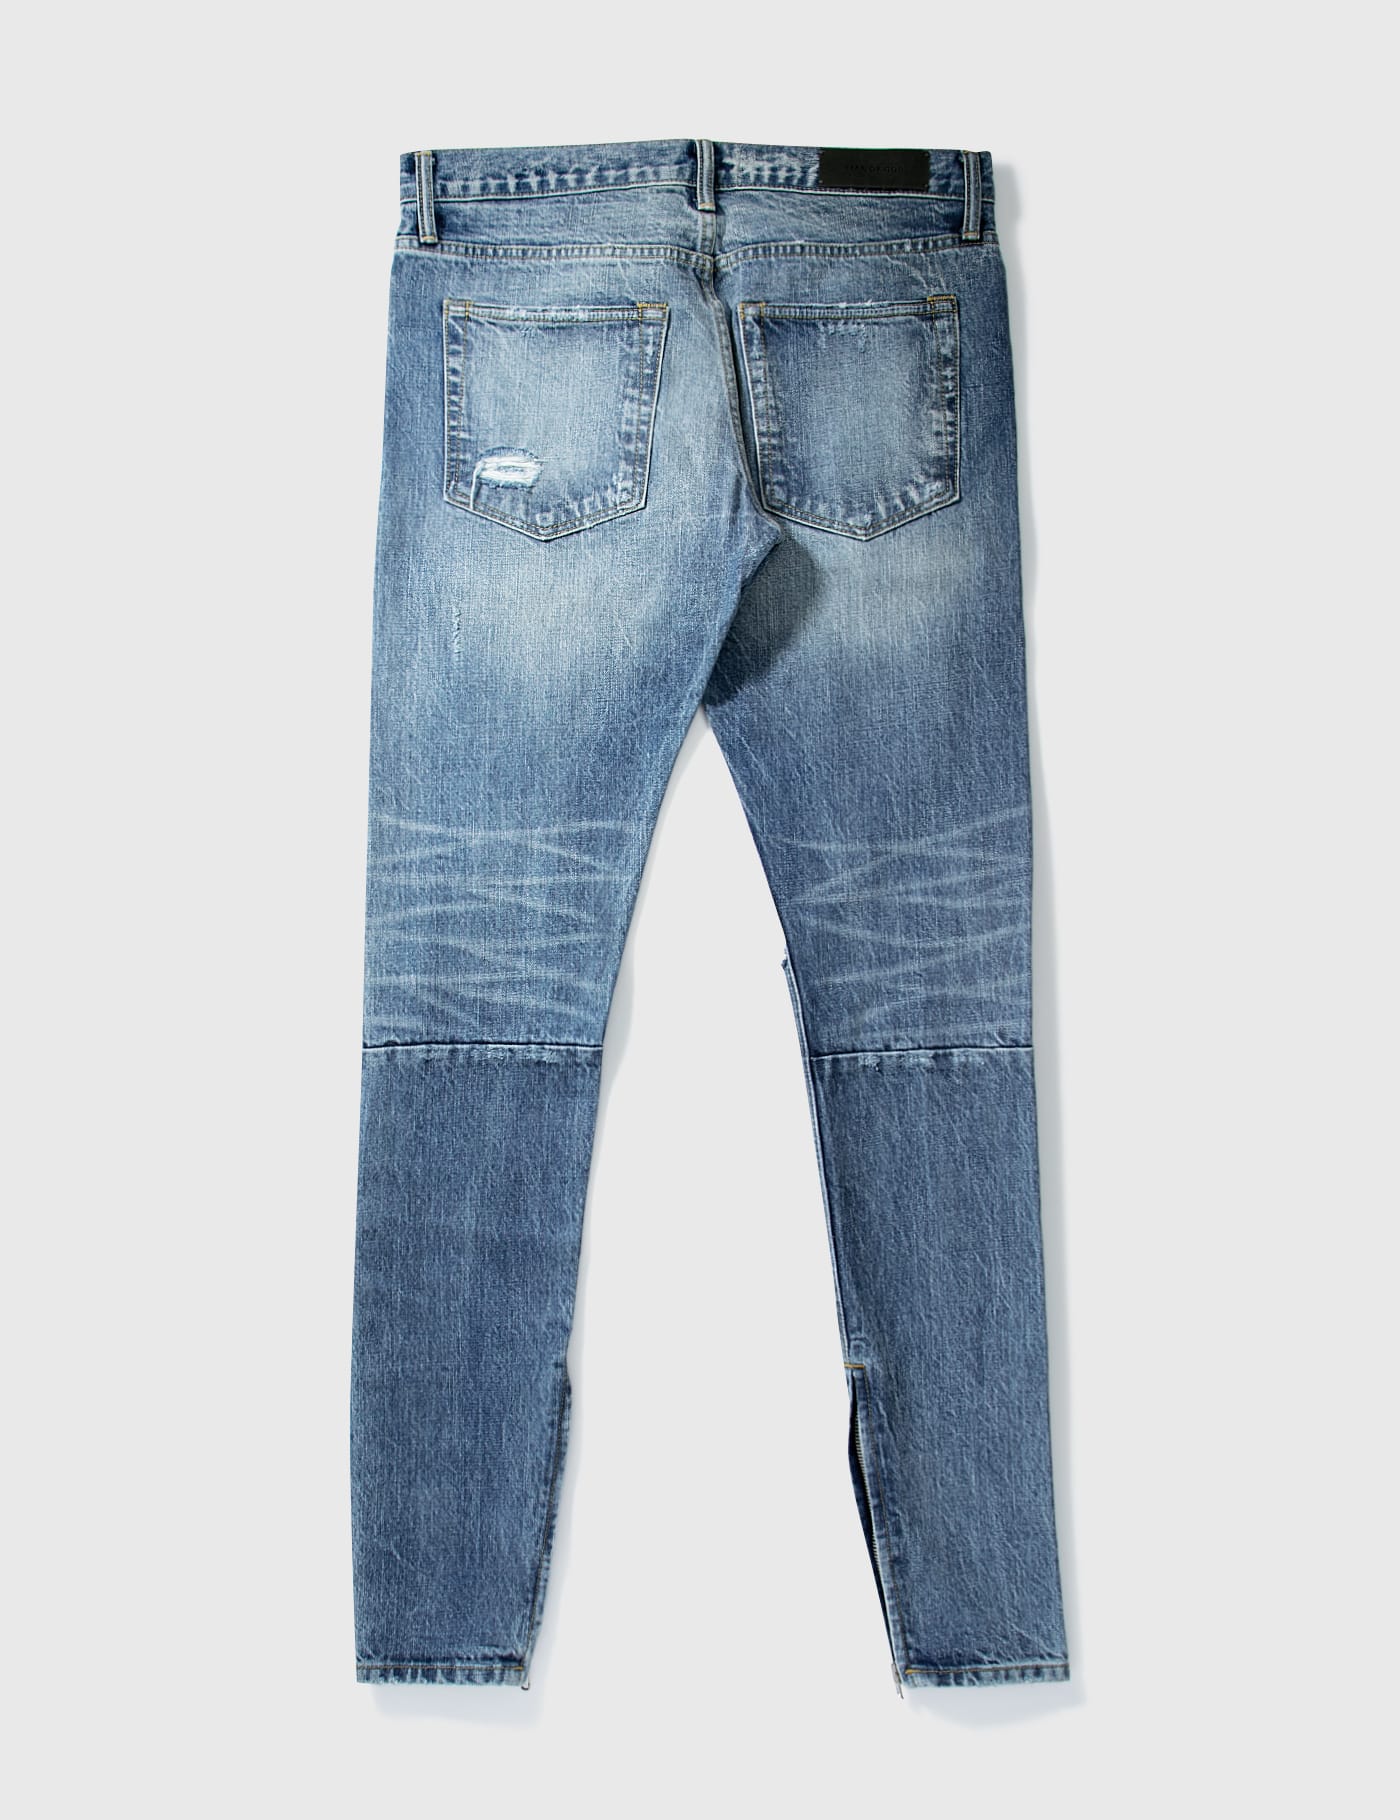 Fear of God - Fear Of God Washed Crushed Jeans | HBX - Globally 